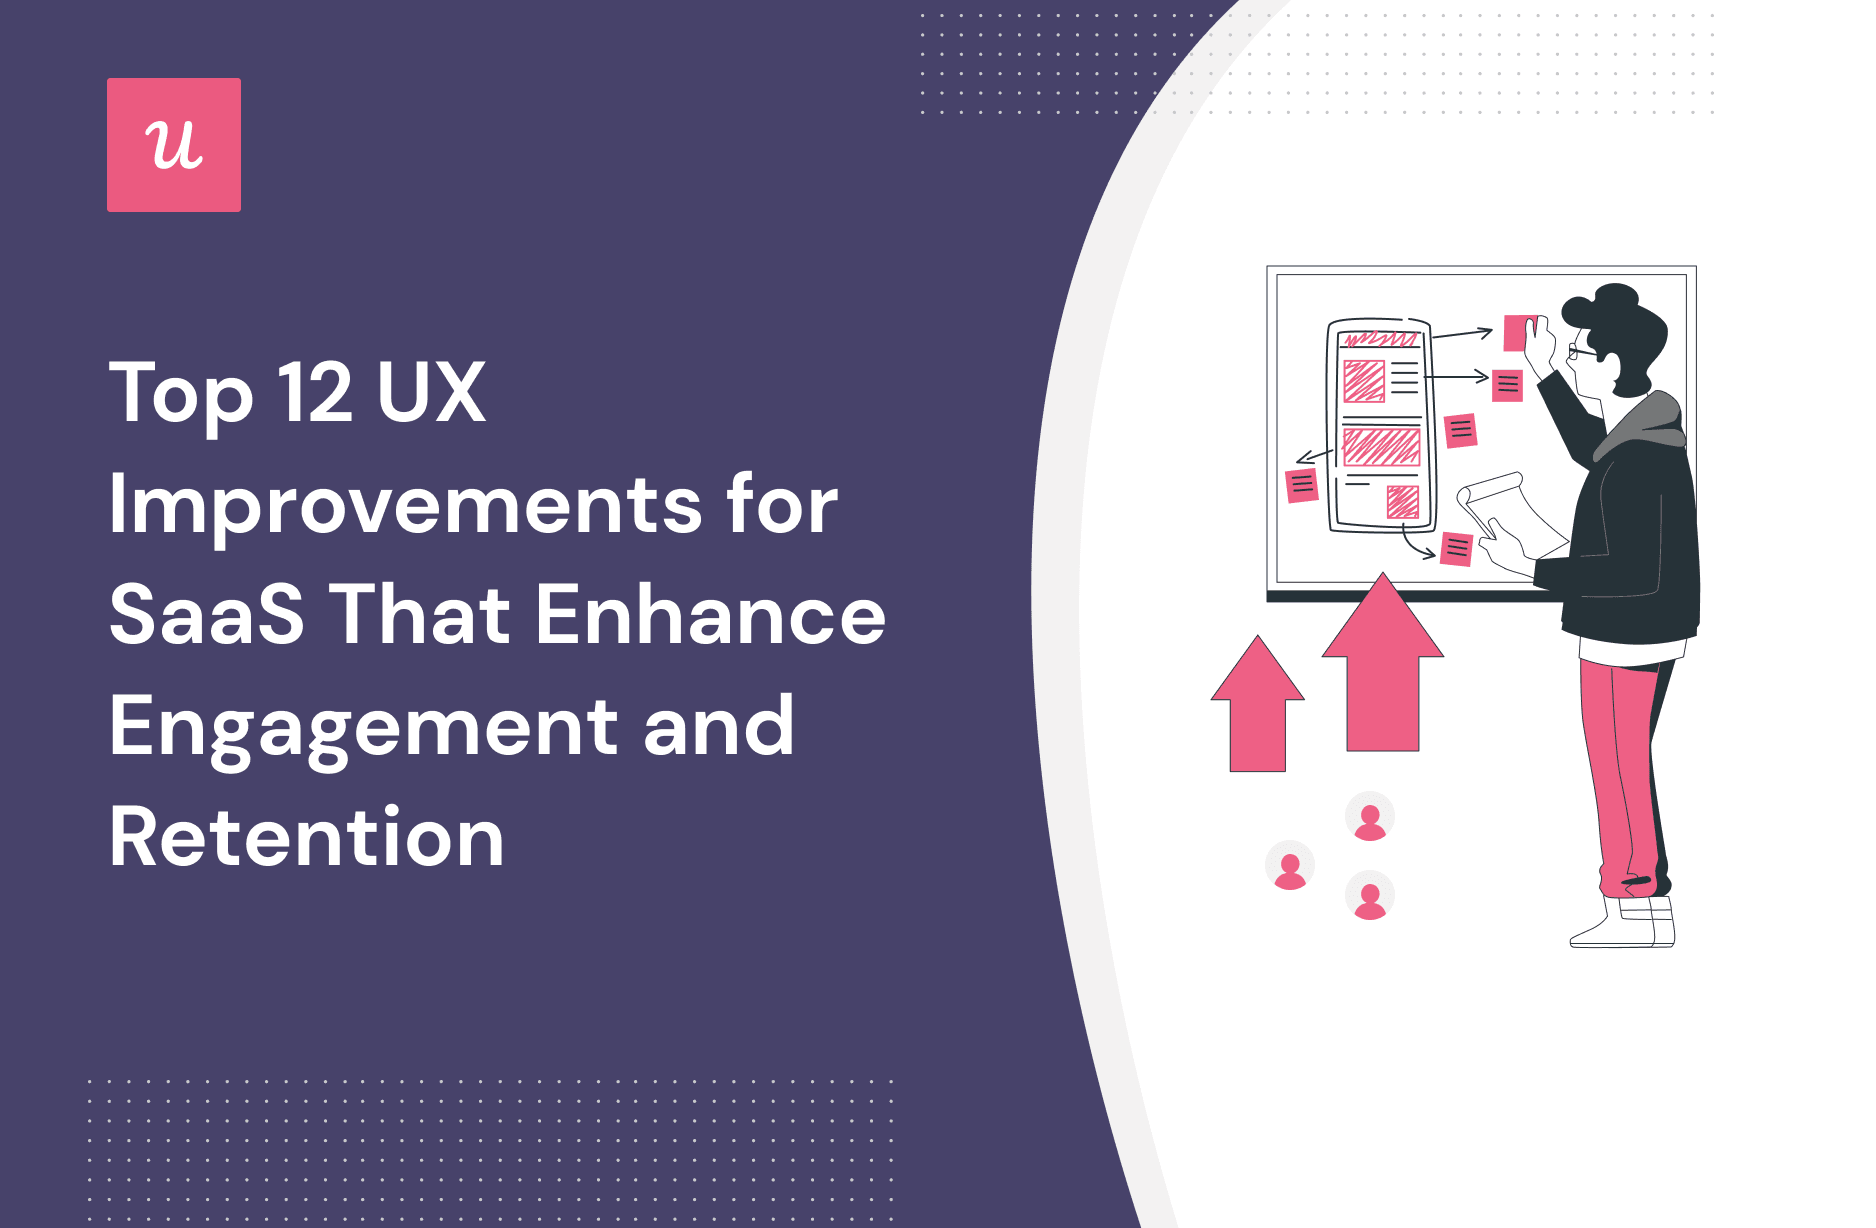 ux improvements for saas